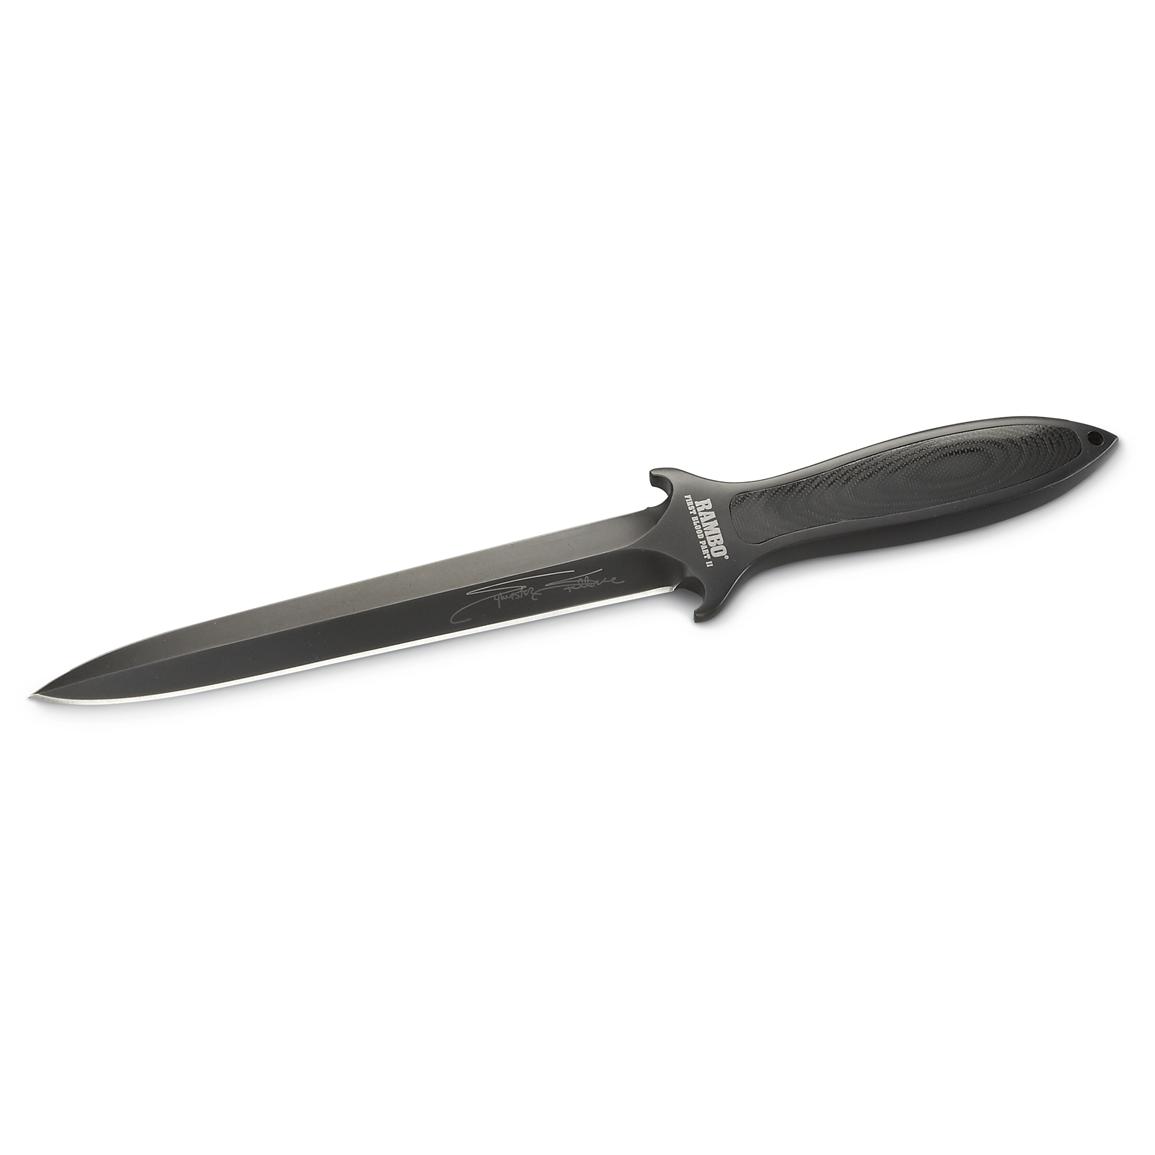 Rambo First Blood Part Ii Limited Edition Stallone Signature Boot Knife 1271 Collectors Knives At Sportsman S Guide